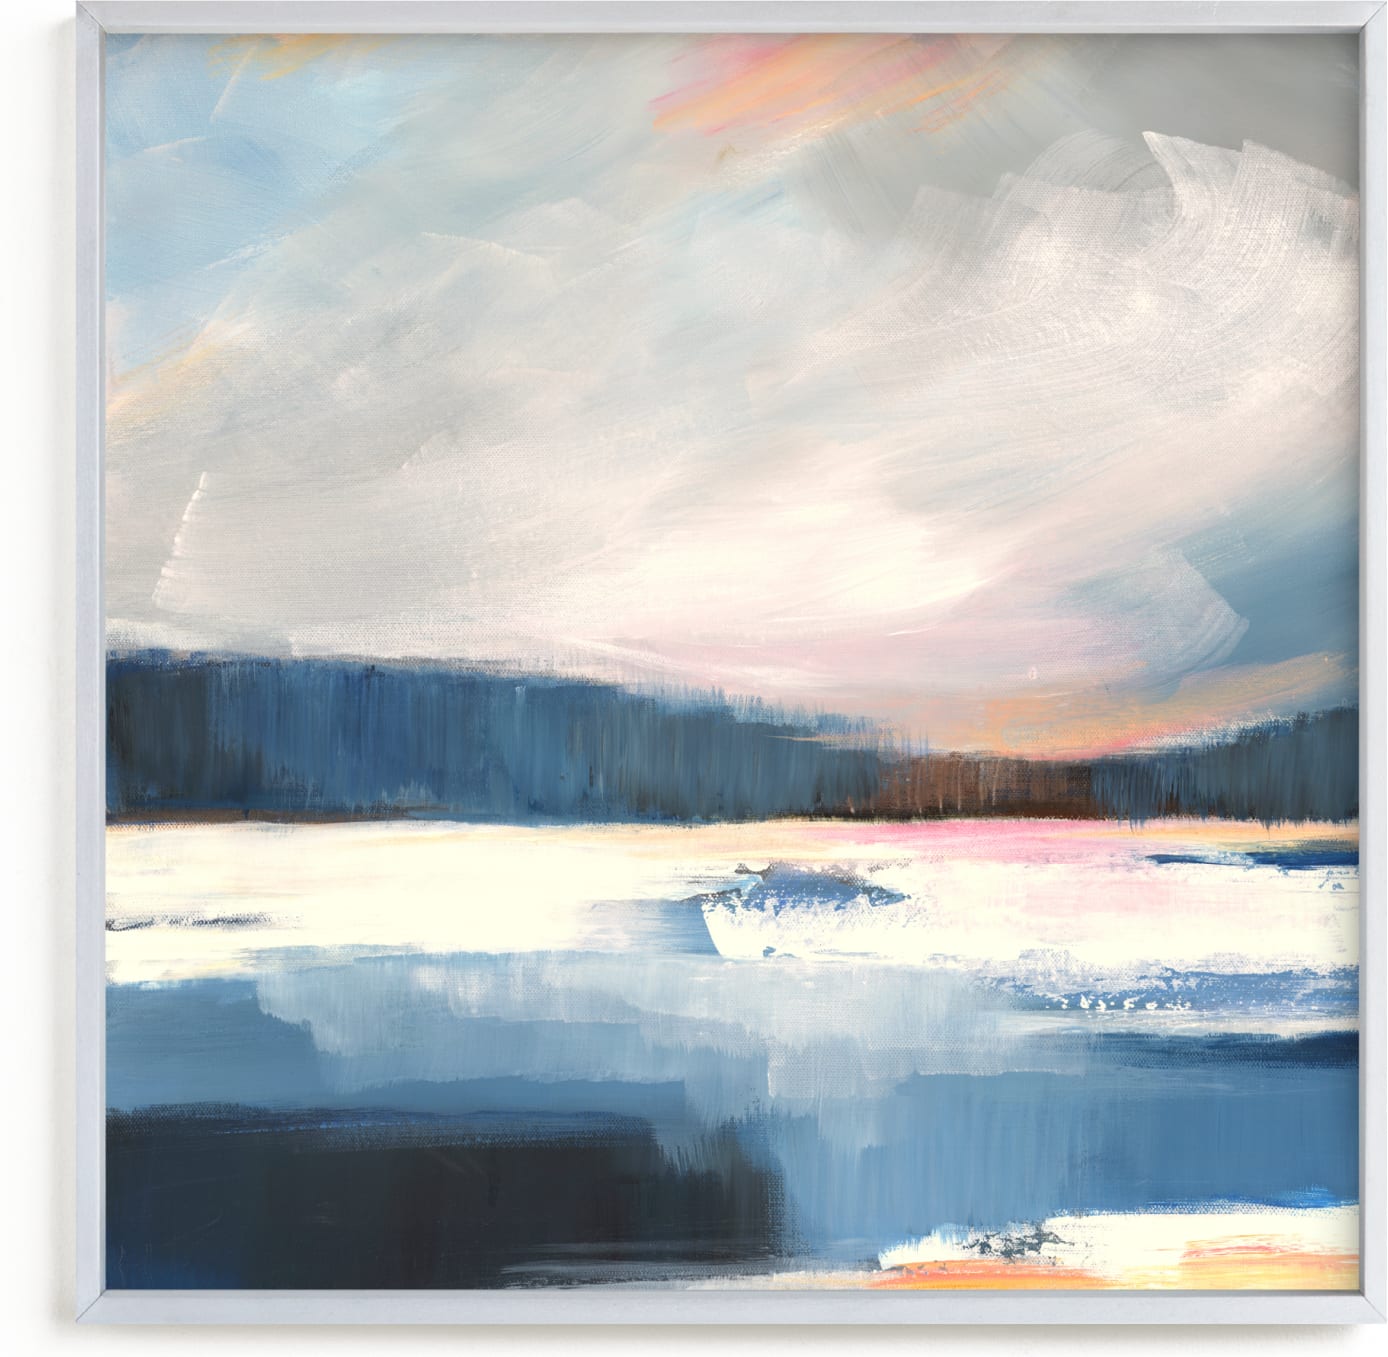 This is a blue art by AlisonJerry called Crystal Lake.